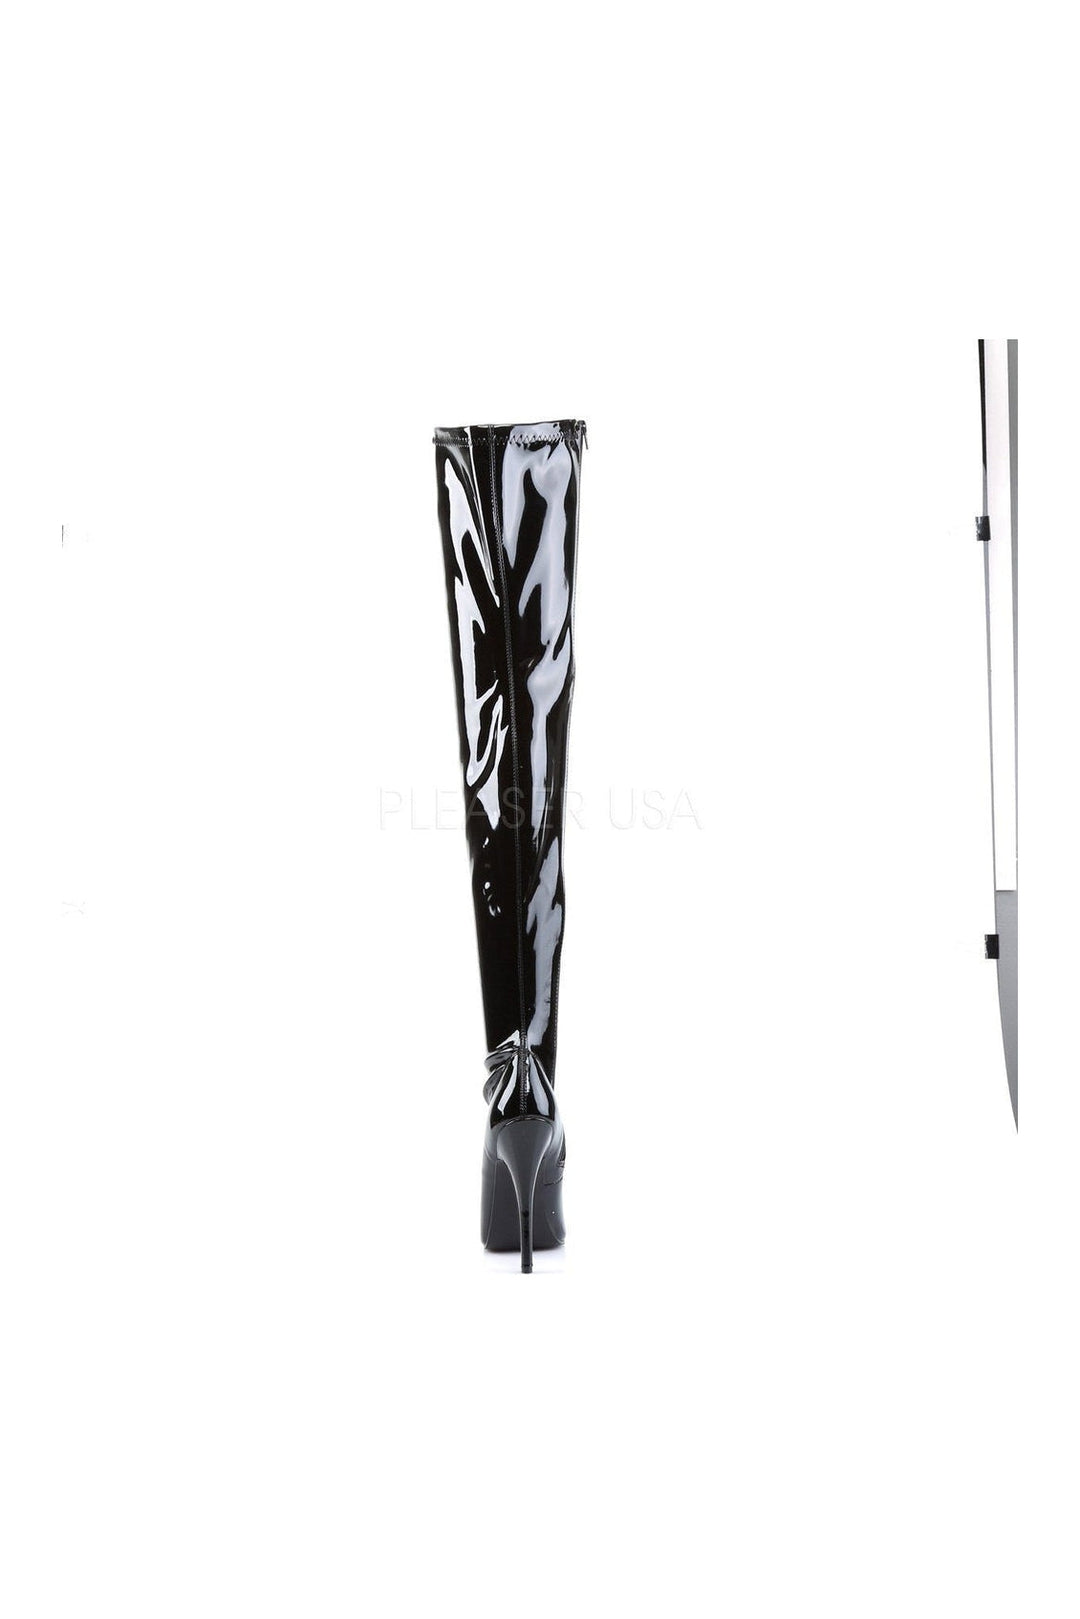 DOMINA-3000 Thigh Boot | Black Patent-Thigh Boots- Stripper Shoes at SEXYSHOES.COM